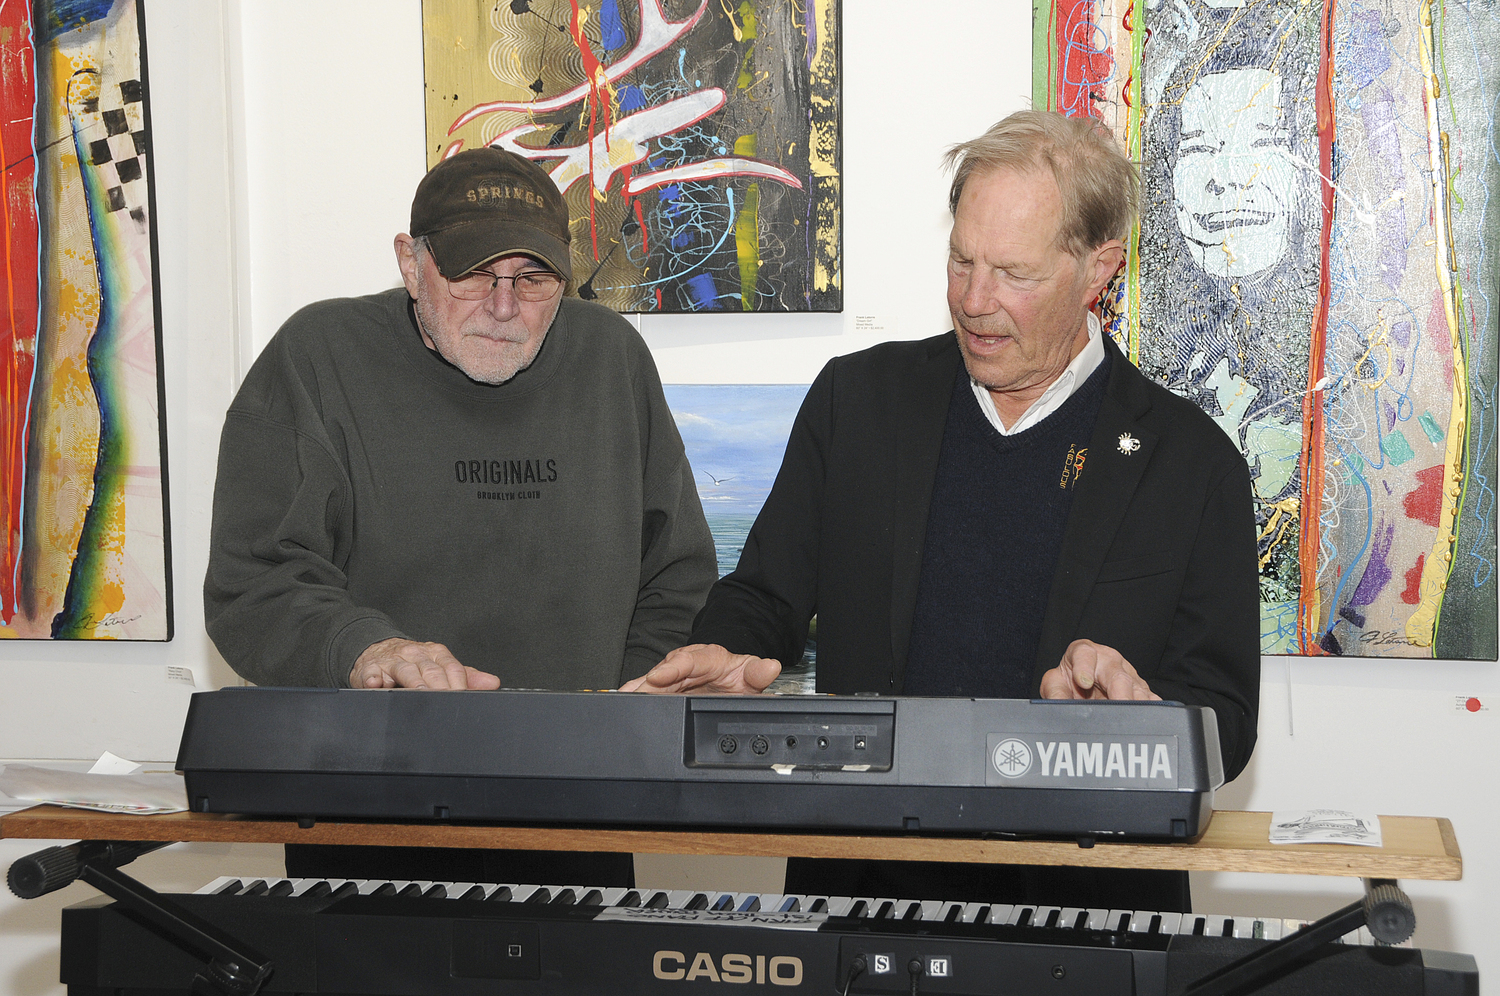 David Morris and William Falkenburg jam on Sunday at Art Groove at Ashawagh Hall for a book signing by Hans Van de Bovenkamp and a tribute to Nadine Daskaloff, featuring a benefit art show and sale to benefit The Ellen Hermanson Foundation as well as the Annieappleseed project. William Falkenberg was the musical guest.    RICHARD LEWIN